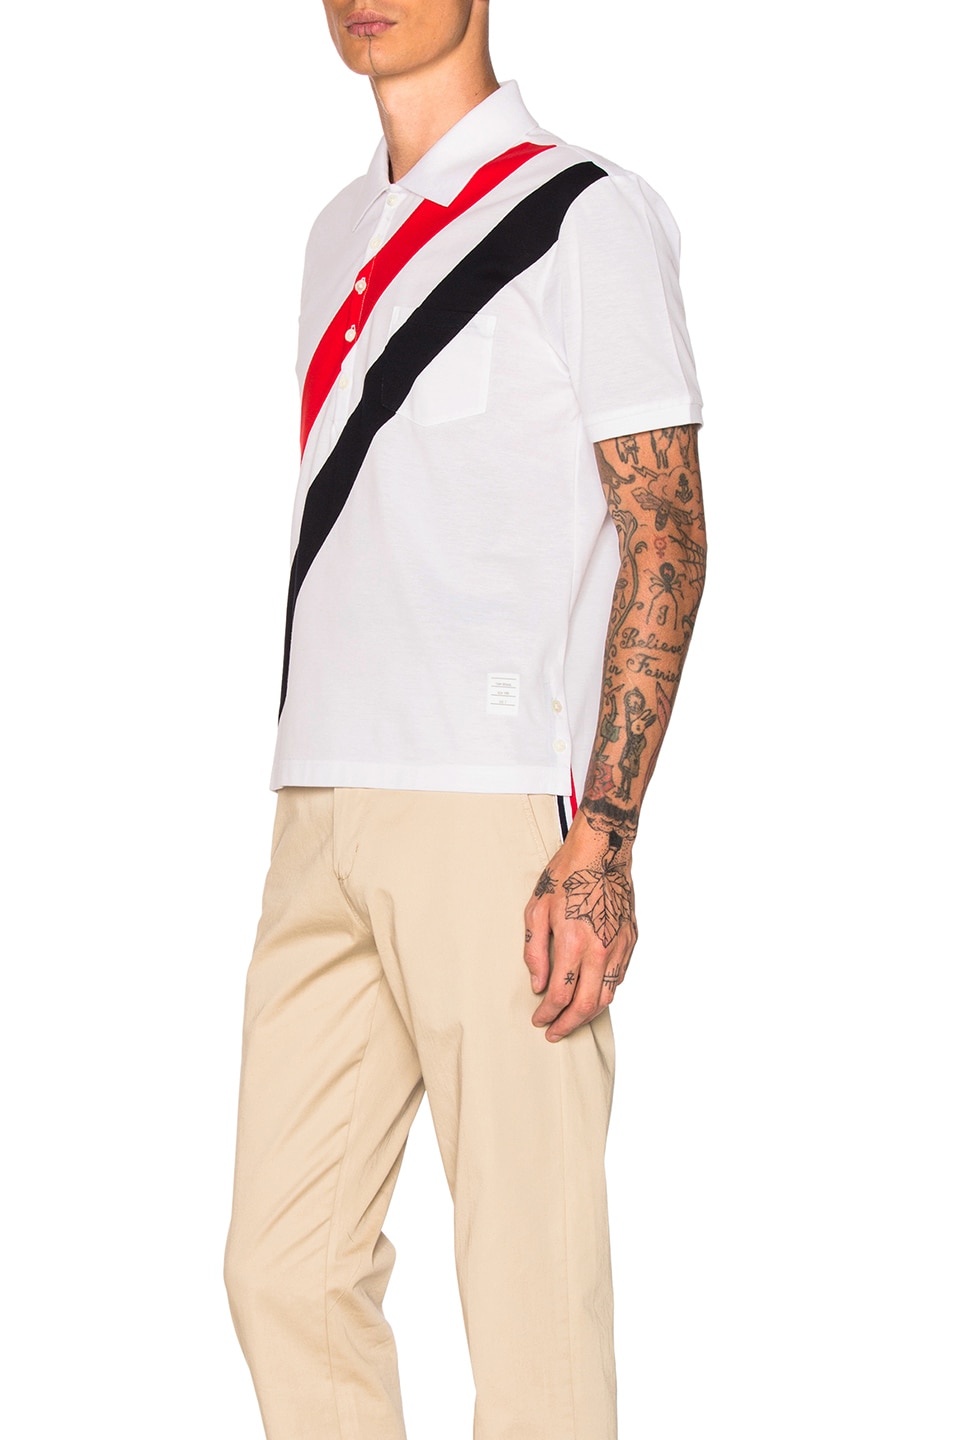 THOM BROWNE Tricolor-Stripe Polo Shirt, White/Red/Navy, Red Pattern ...